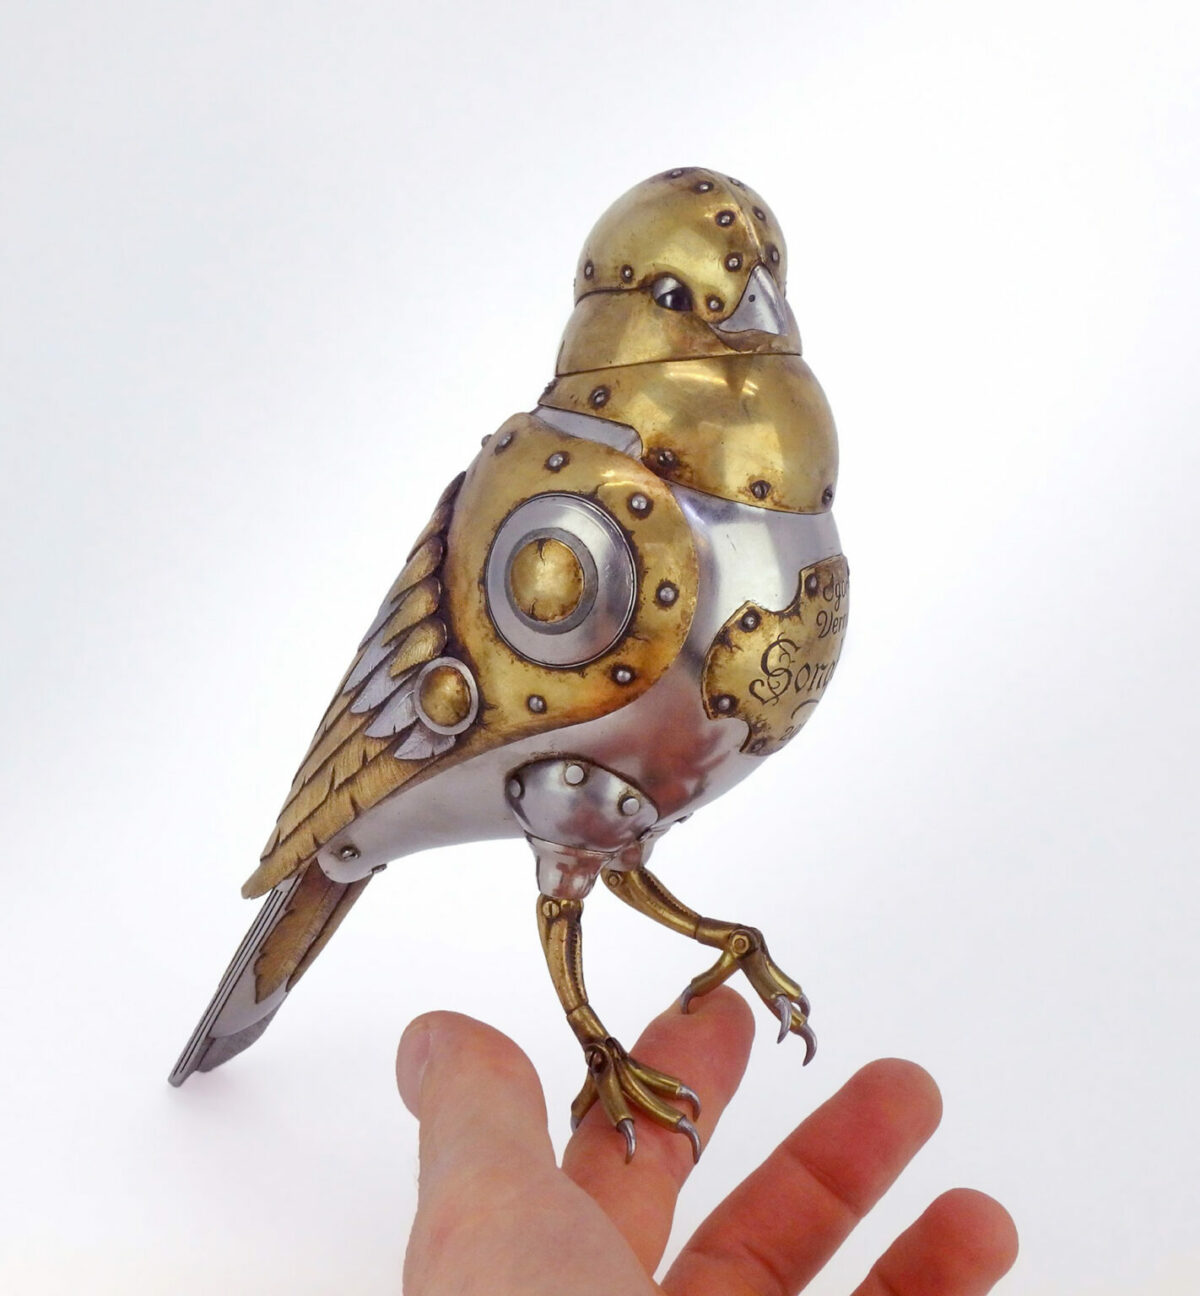 Intricate Steampunk Creatures By Igor Verny (11)